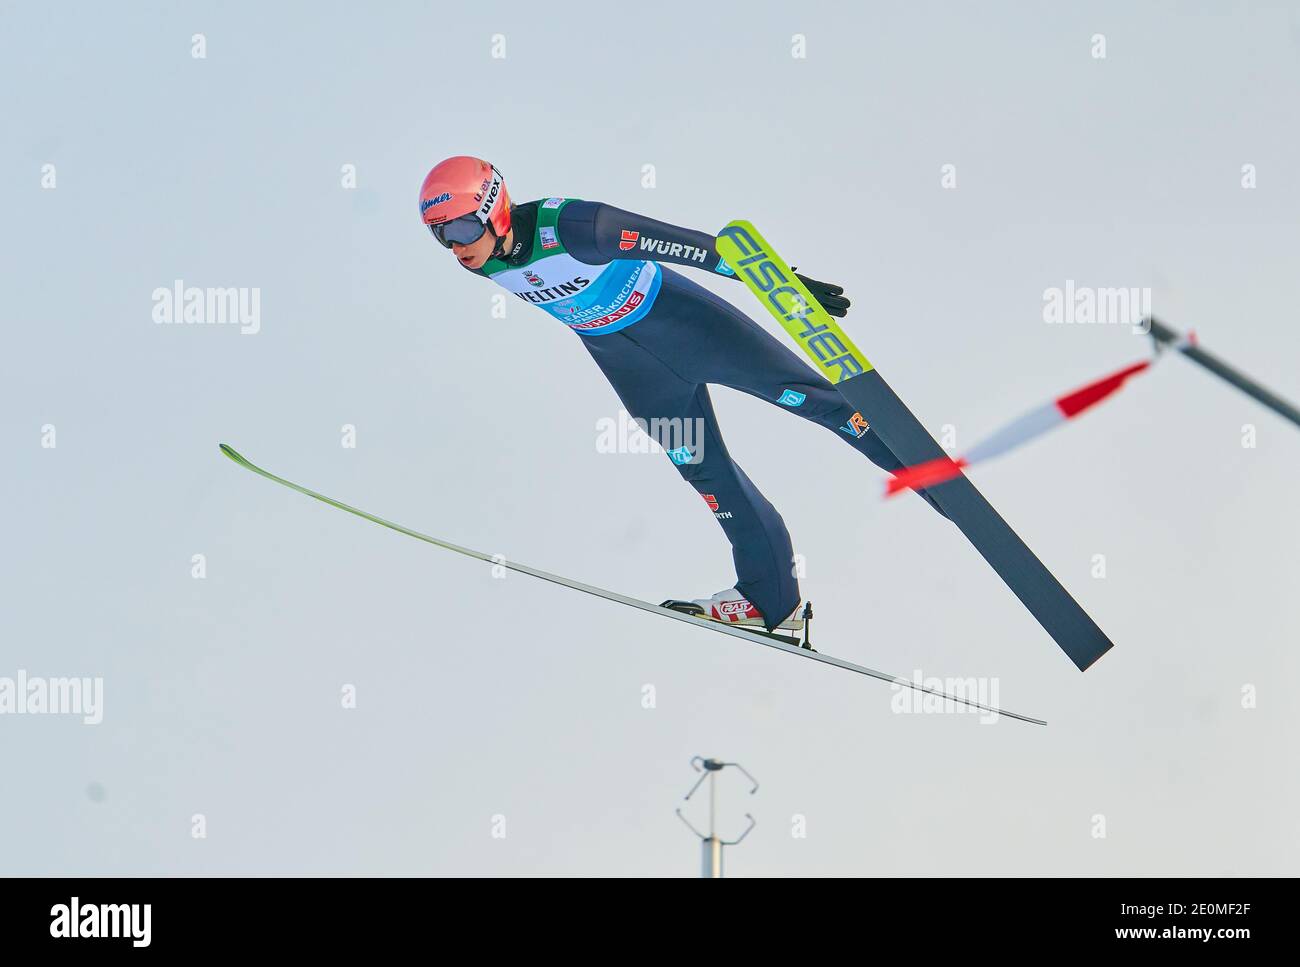 Karl GEIGER, GER  in action at the Four Hills Tournament Ski Jumping at Olympic Stadium, Grosse Olympiaschanze in Garmisch-Partenkirchen, Bavaria, Germany, January 01, 2021.  © Peter Schatz / Alamy Live News Stock Photo